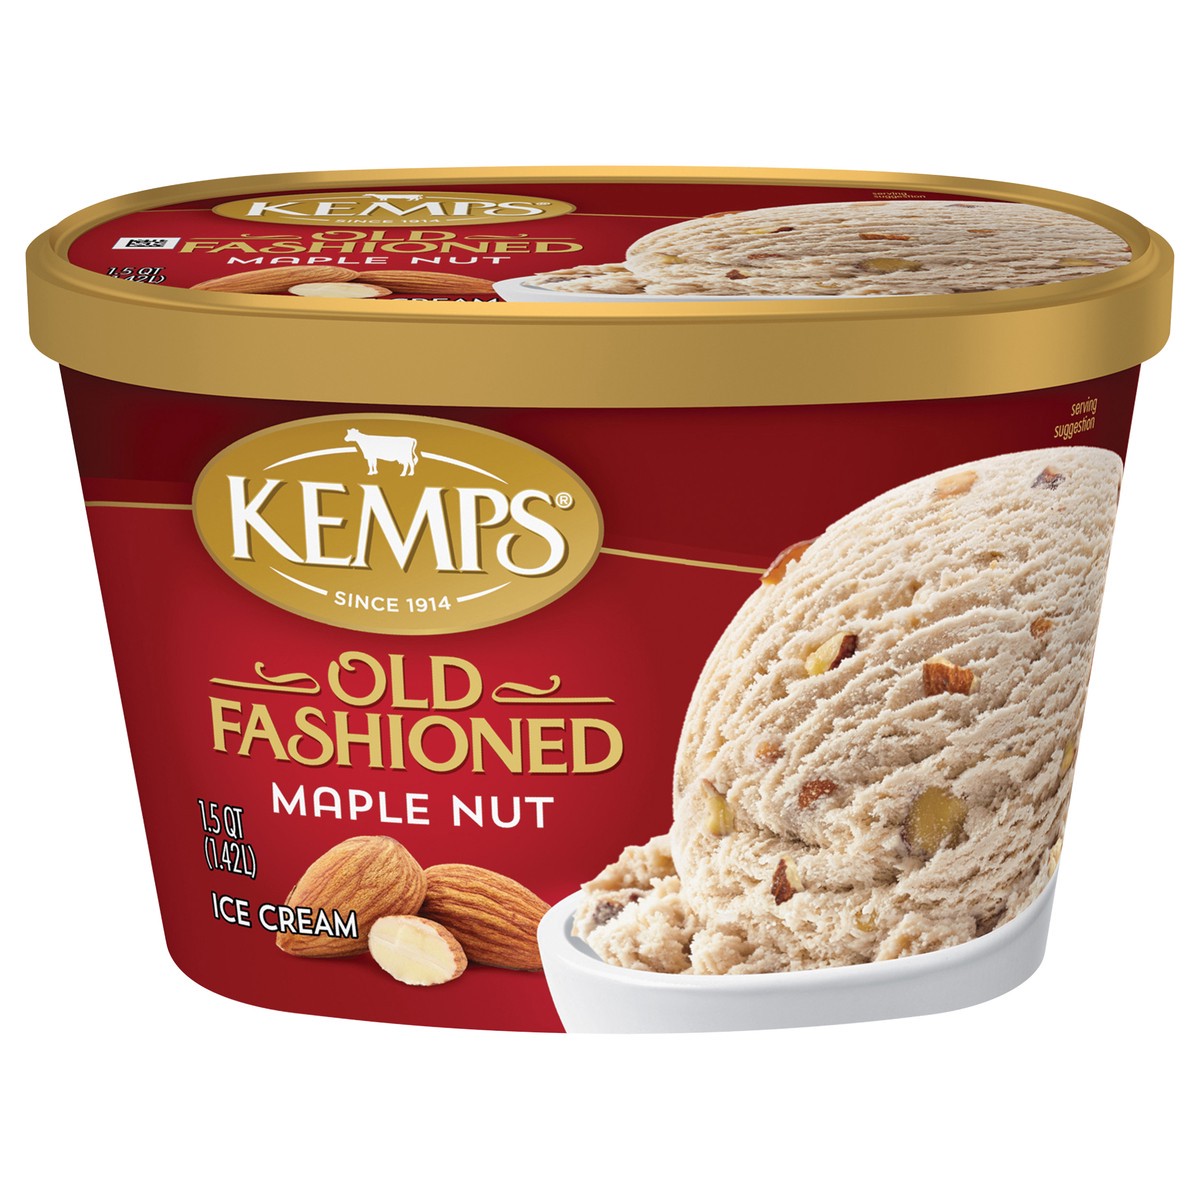 slide 5 of 13, Kemps Old Fashioned Maple Nut Ice Cream, 1.5 qt